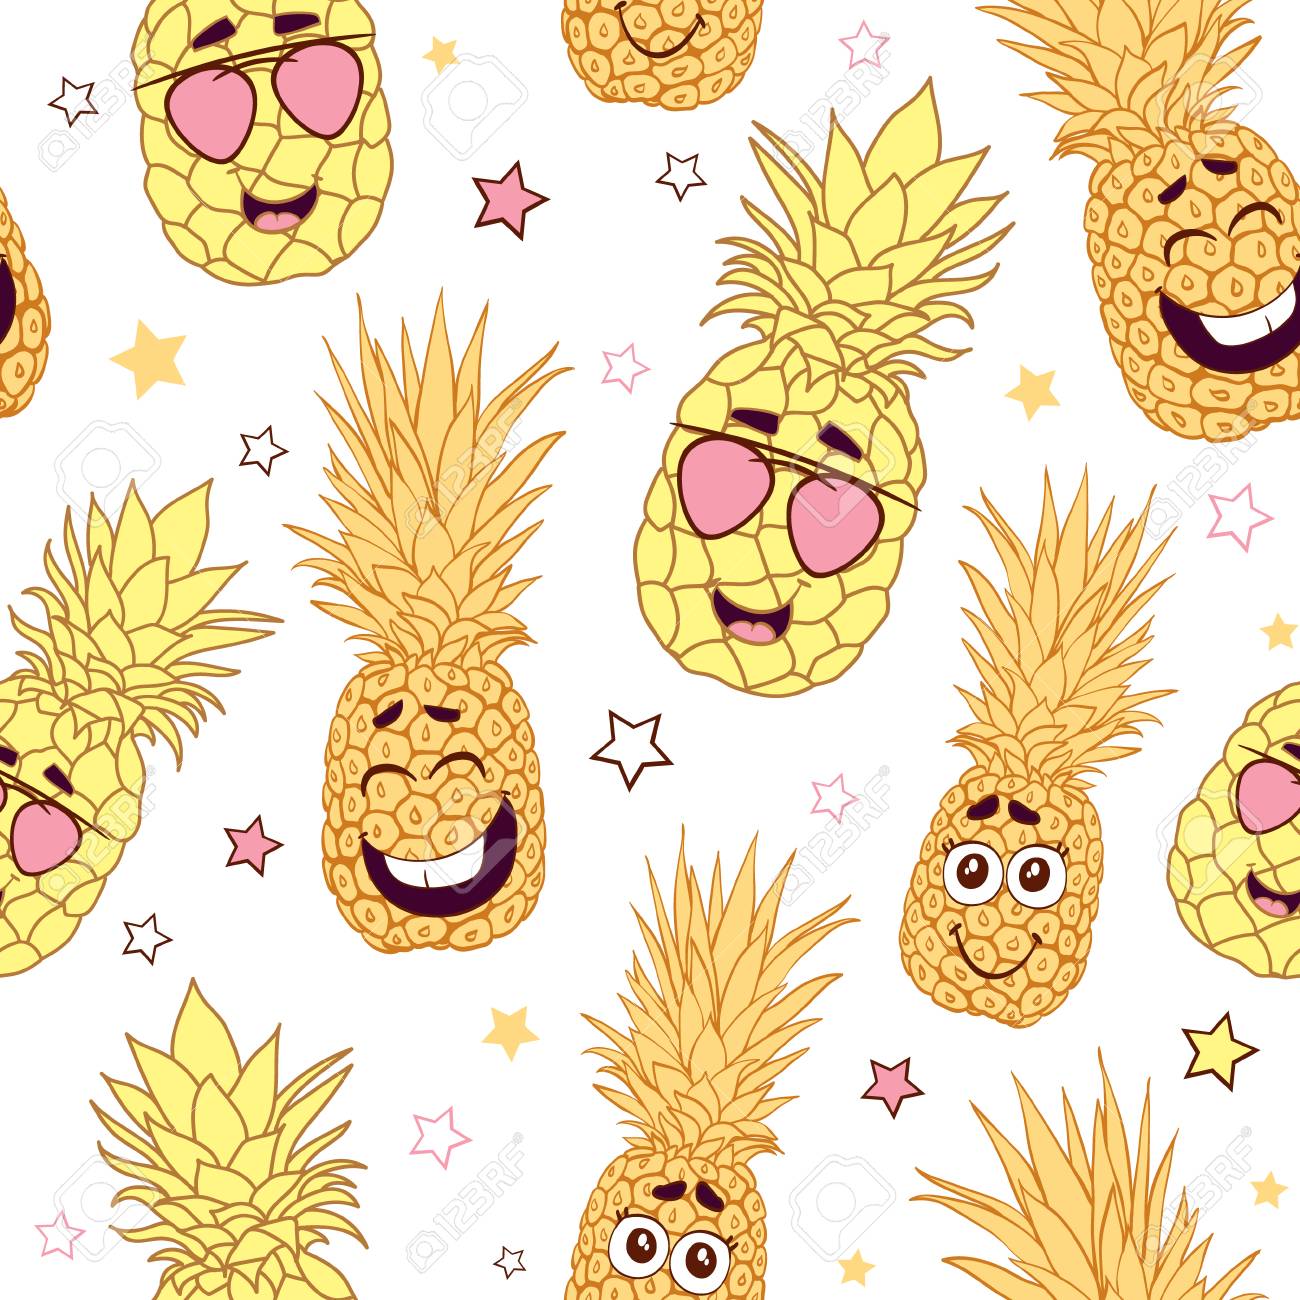 Free download Fun Pineapple Faces Seamless Repeat Pattern ...